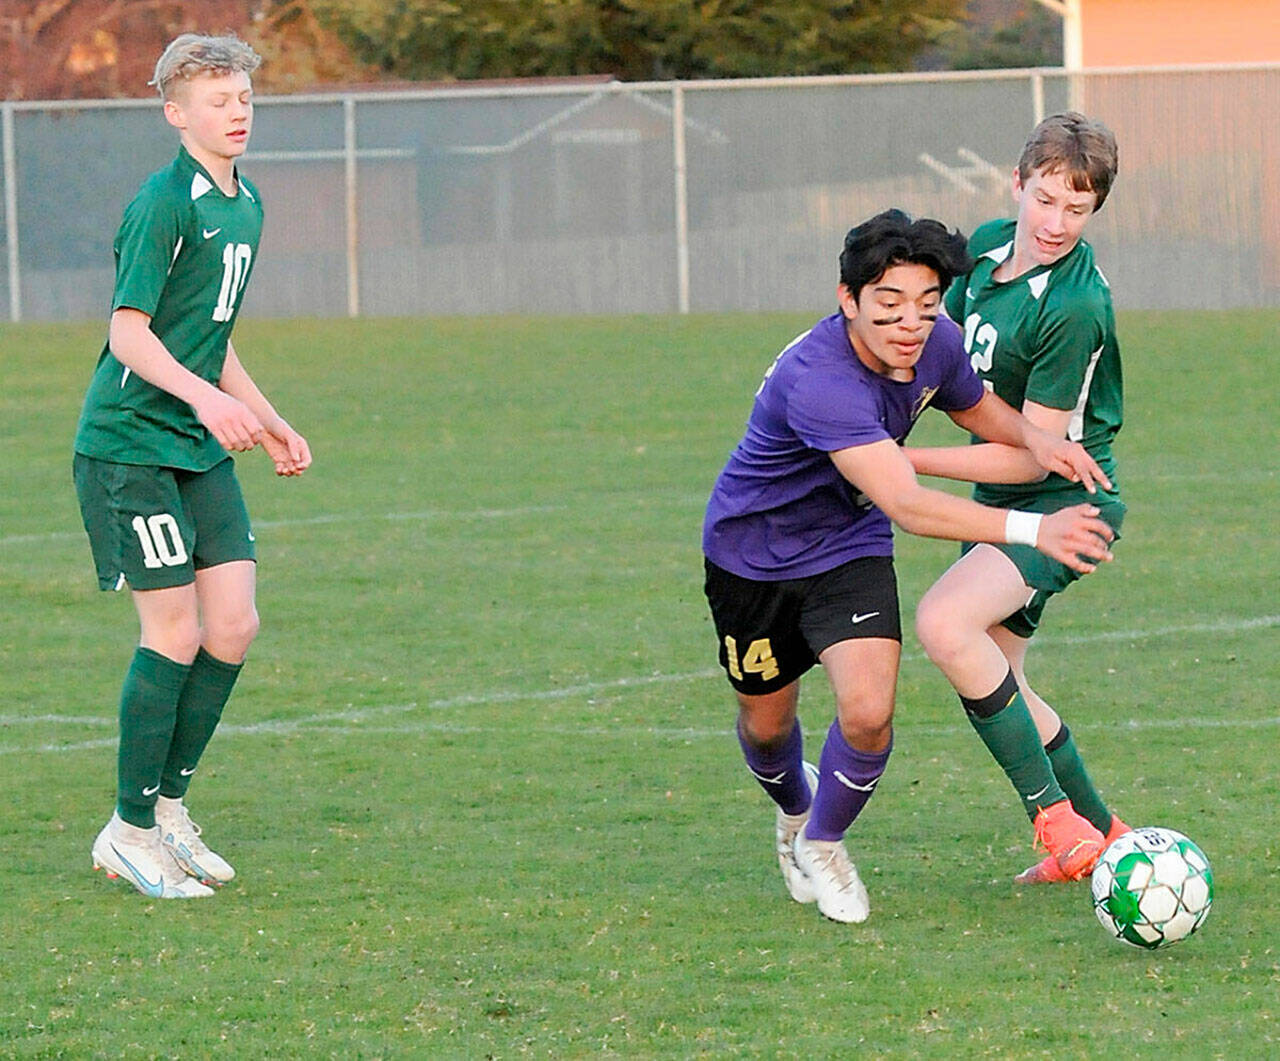 Photo by Keith Thorpe, Olympic Peninsula News Group/ Sequim’s Evan Cisneros, center, pushes past Port Angeles’ Jacob Weaver, right, as Weaver’s teammate, Matthew Miller, looks on at left on March 16 in Port Angeles.